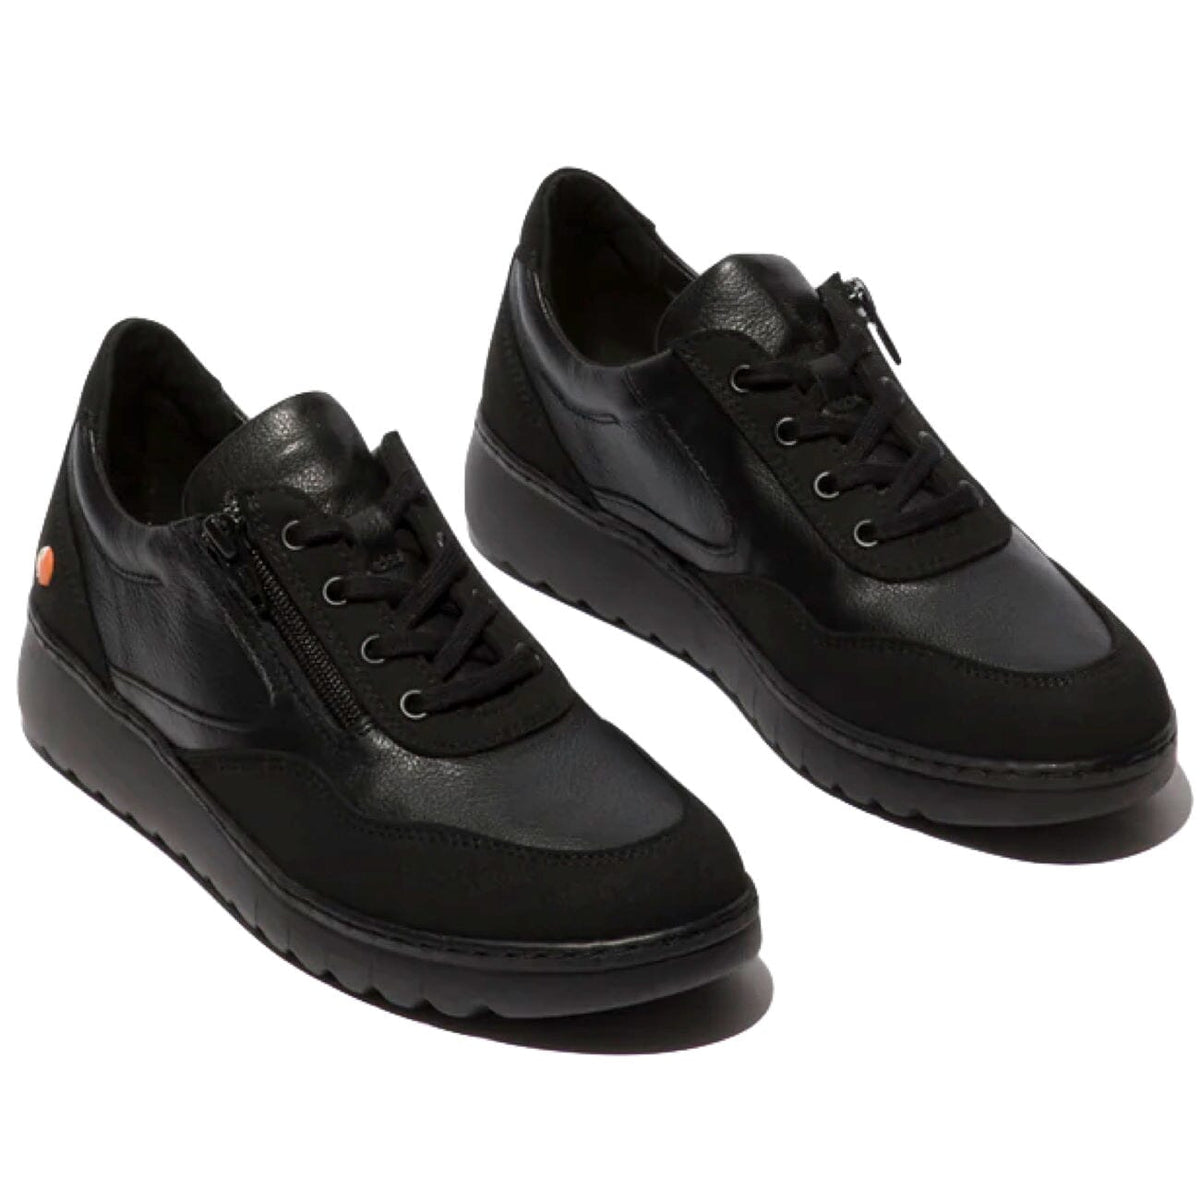 Softinos, Echo700, Laceup Shoe, Supple Leather &amp; Suede, Black w/ Black Suede Shoes Softinos Black w/ Black Suede 36 